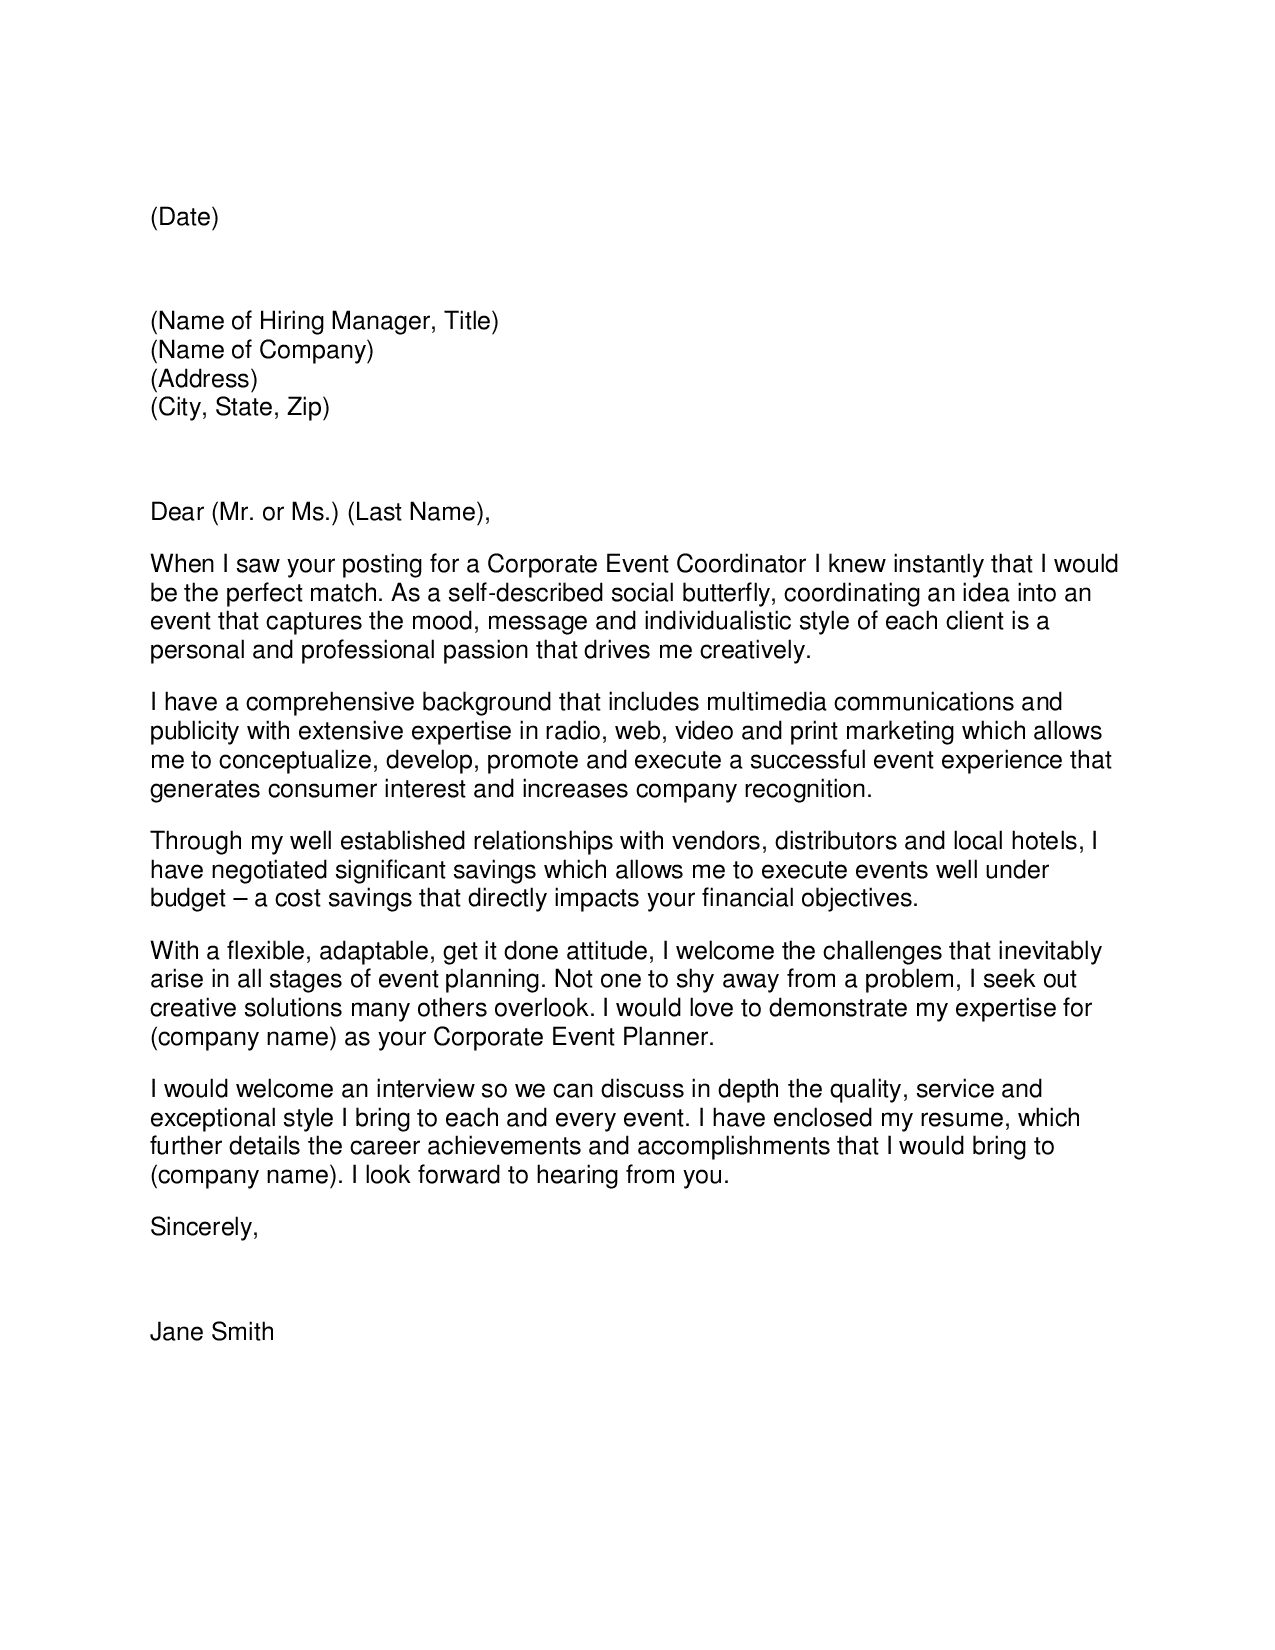 TEXT VERSION OF THE EVENT COORDINATOR COVER LETTER SAMPLE